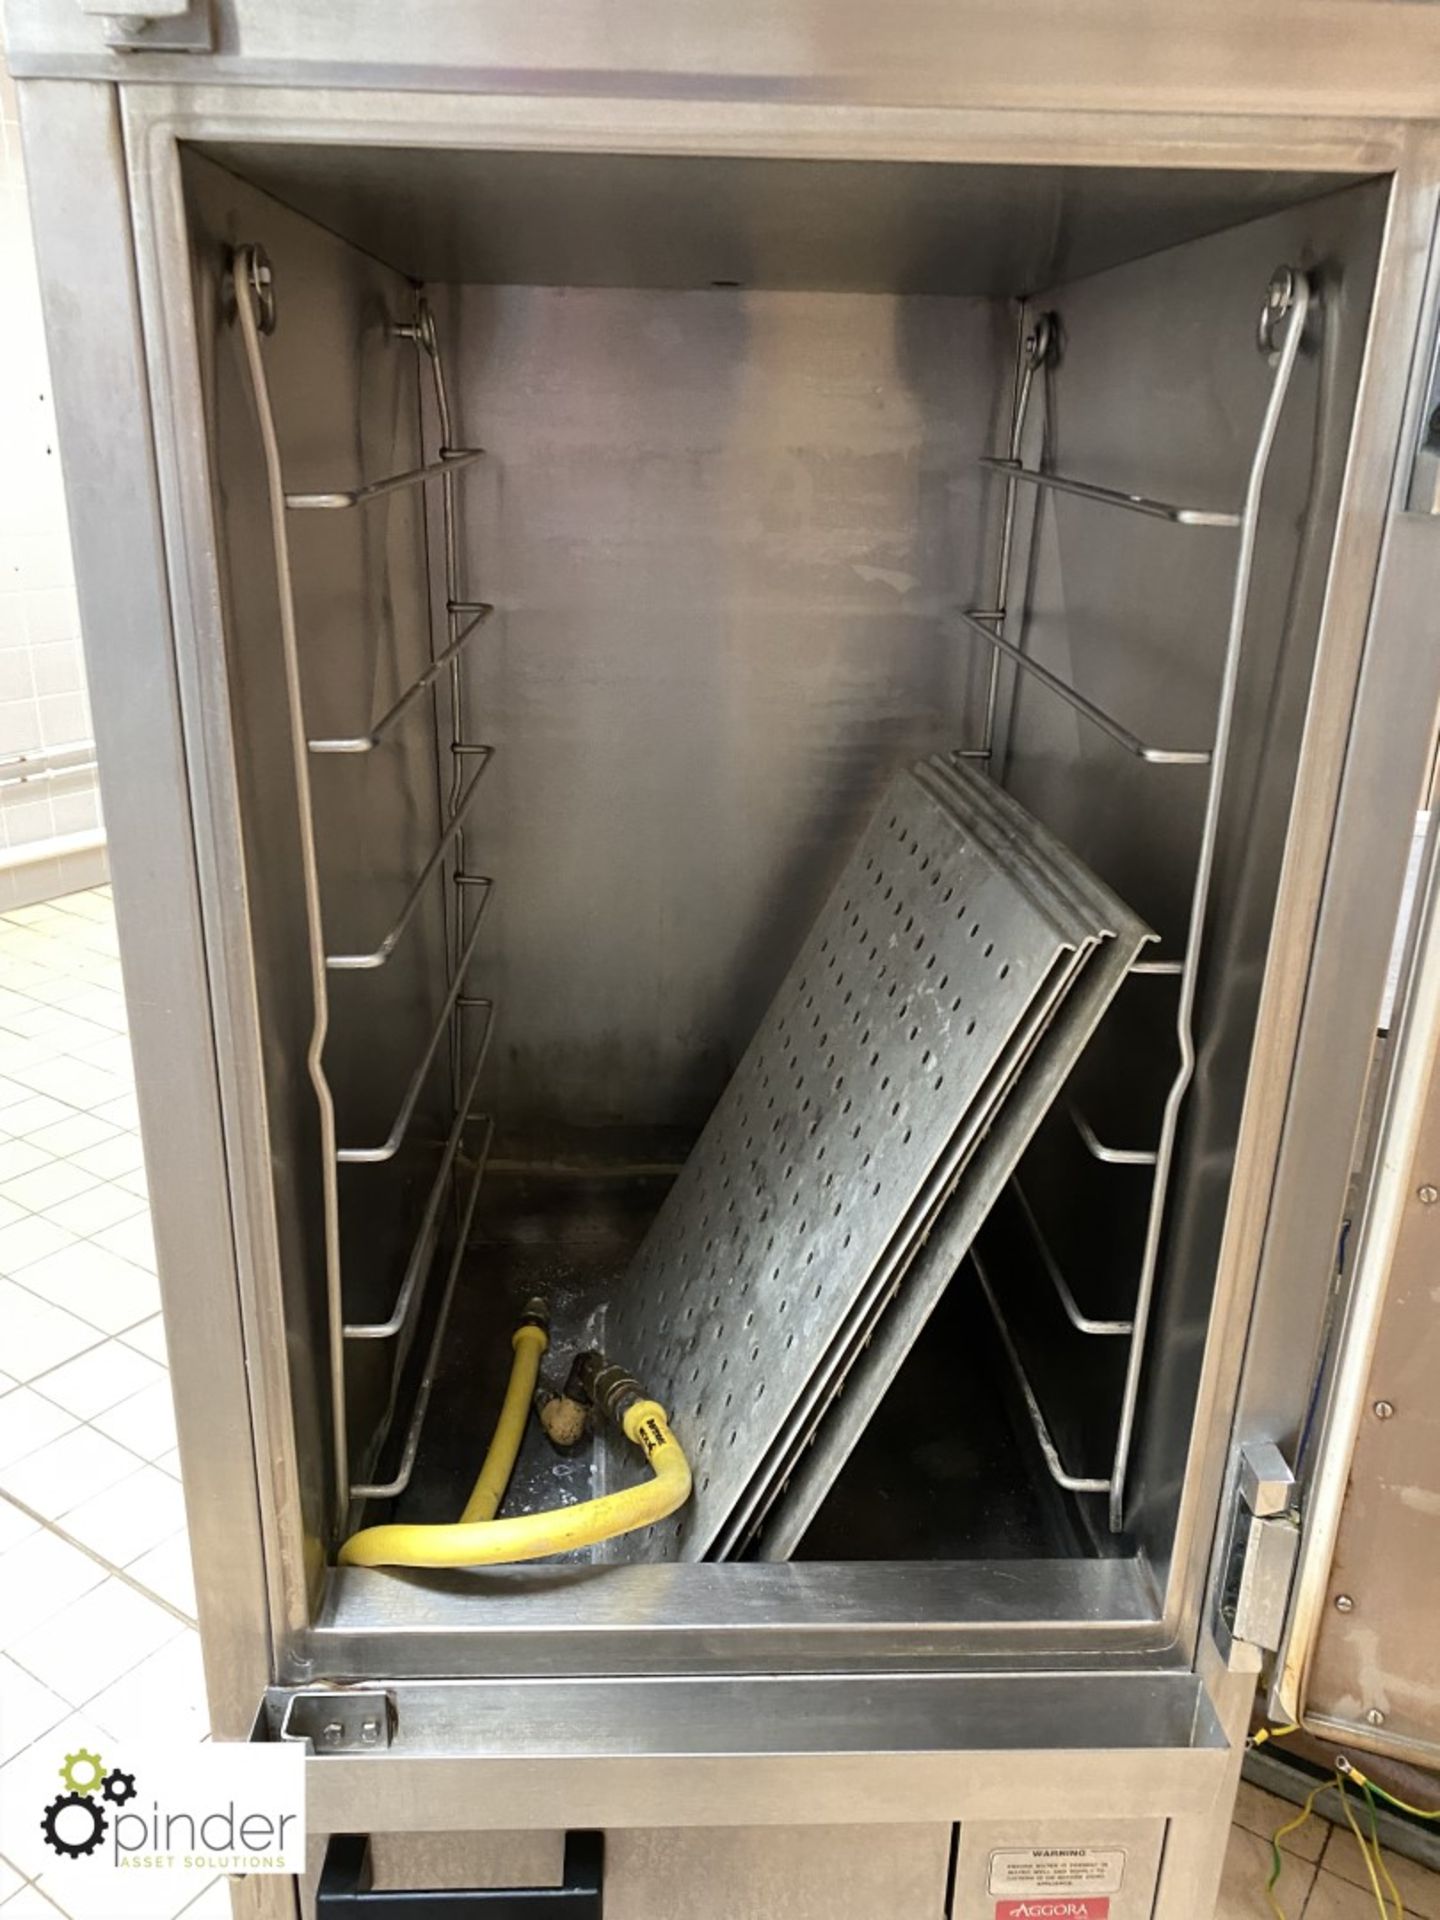 Falcon G5478 gas fired Steaming Oven (located in 24th Floor Kitchen) - Image 2 of 4